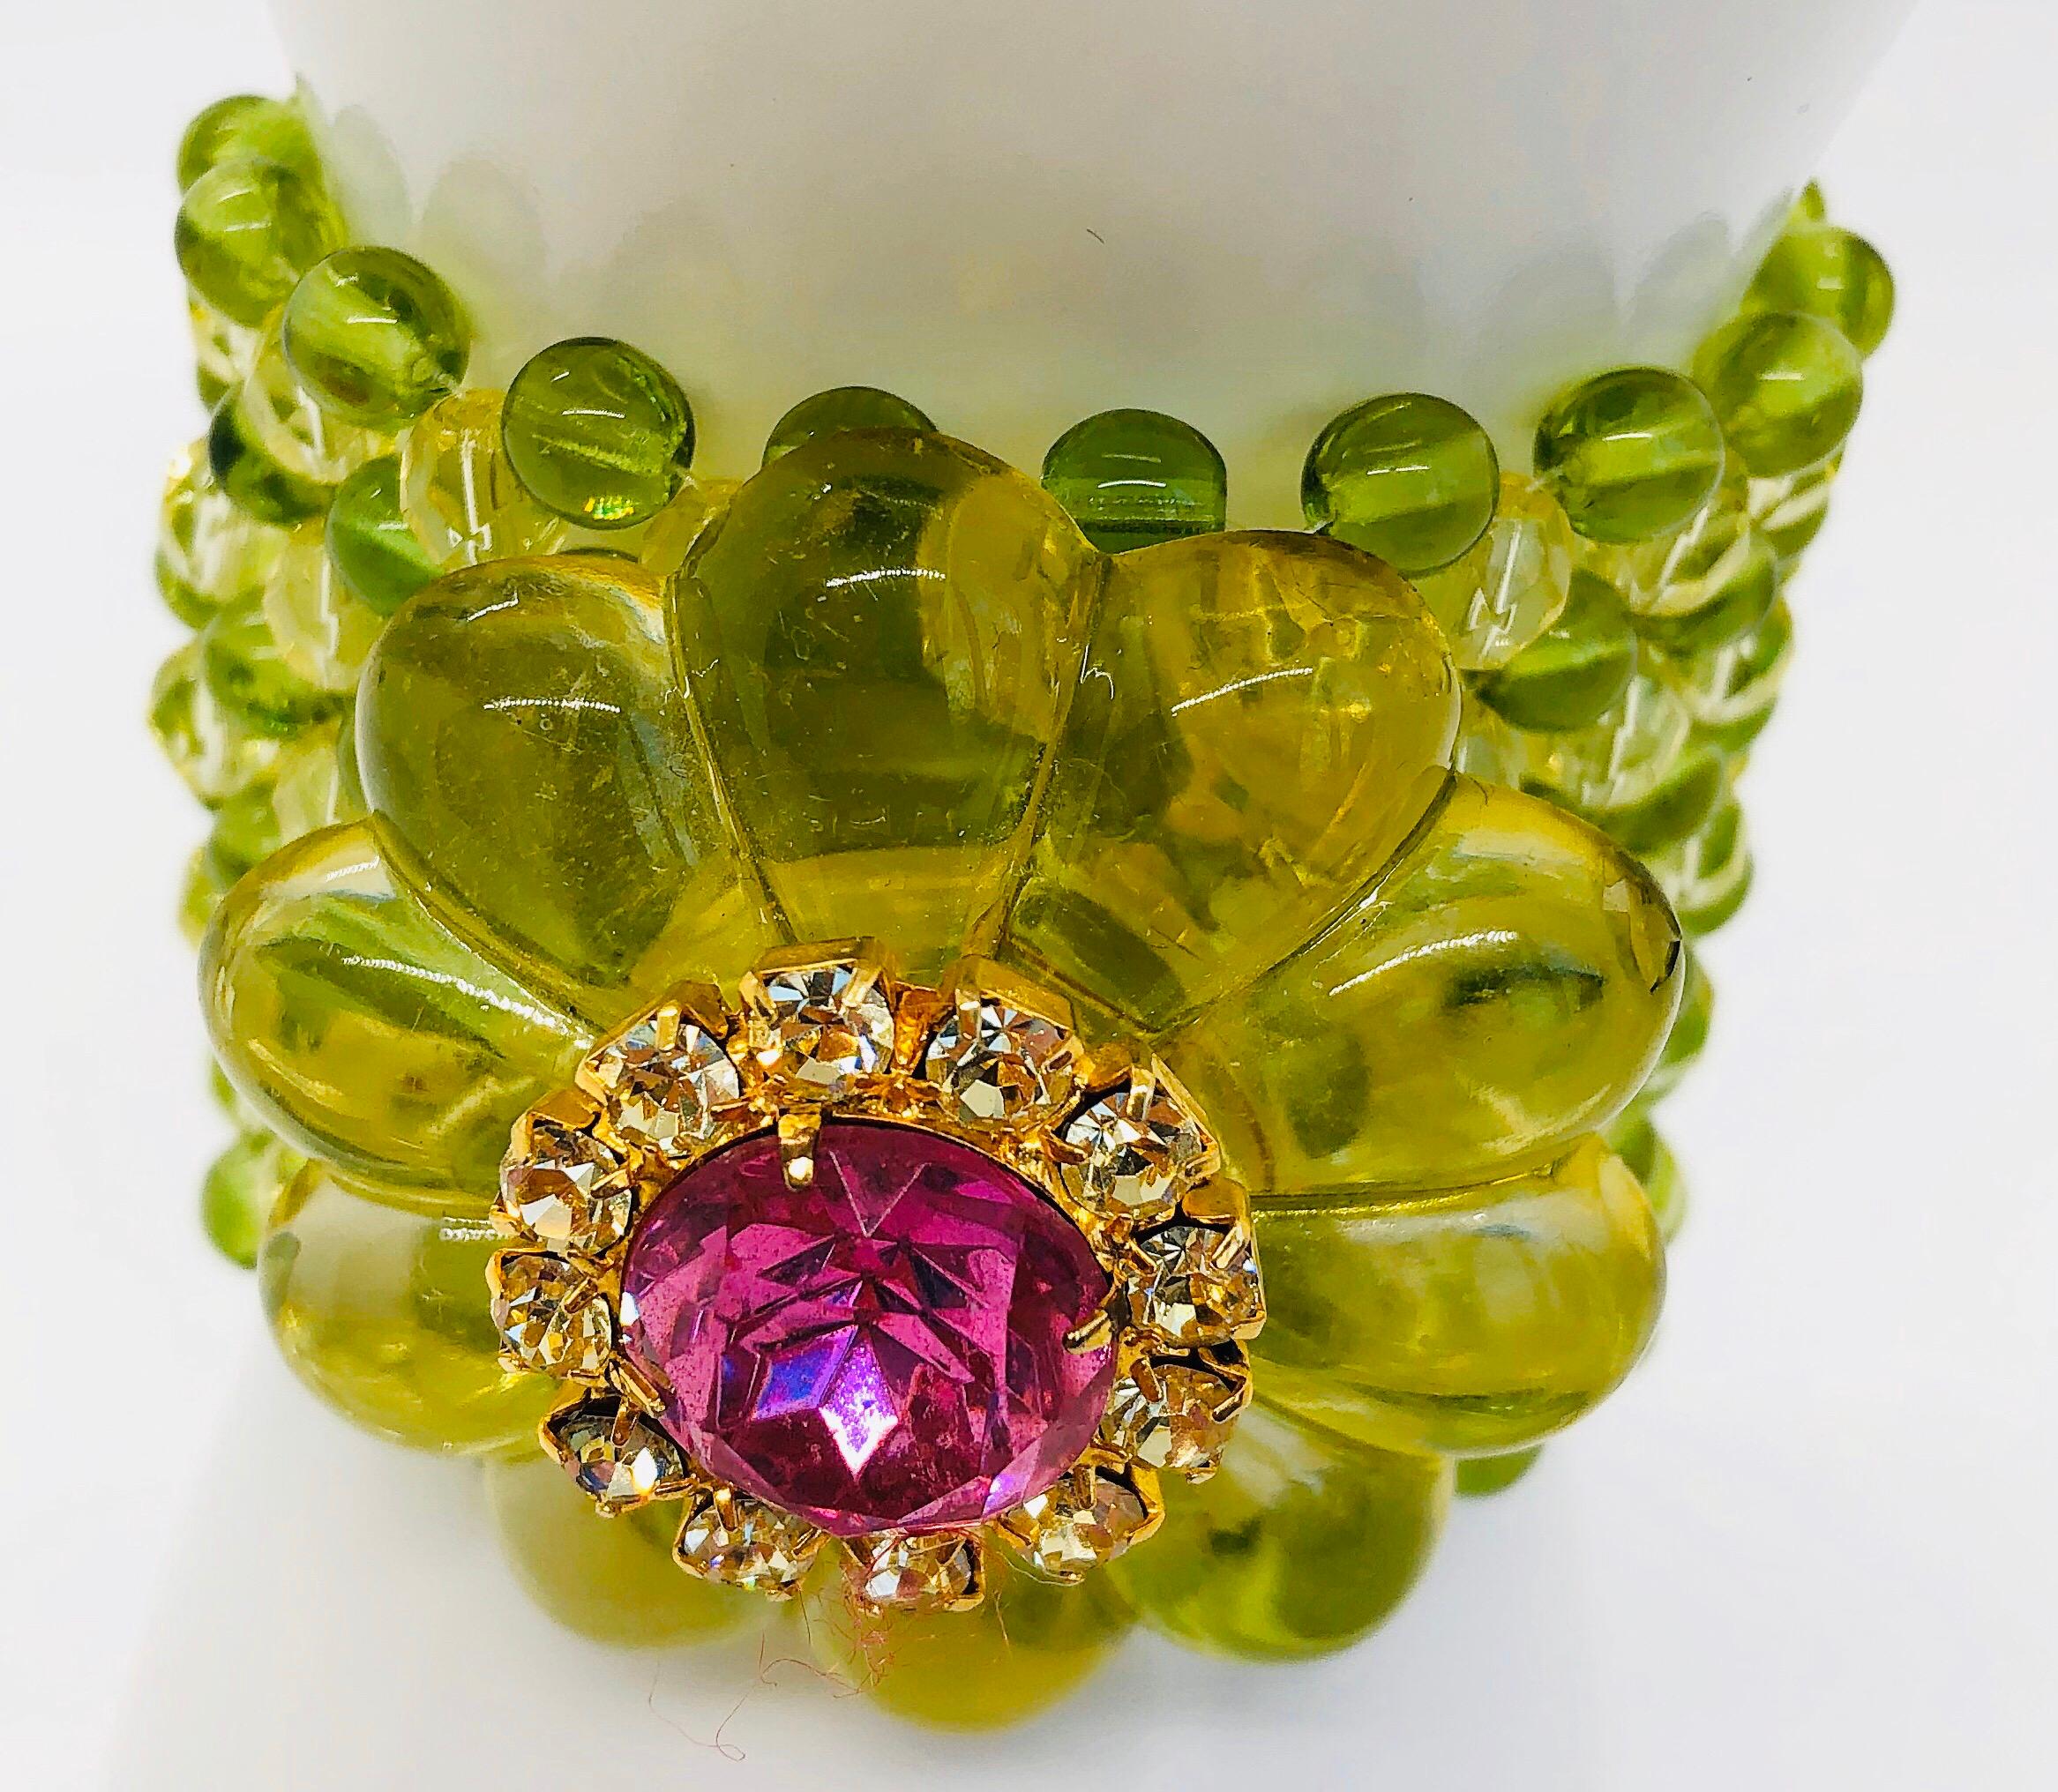 Chic 1960s Neon Lime Green + Hot Pink Lucite Vintage 60s Flower Bracelet Cuff 7